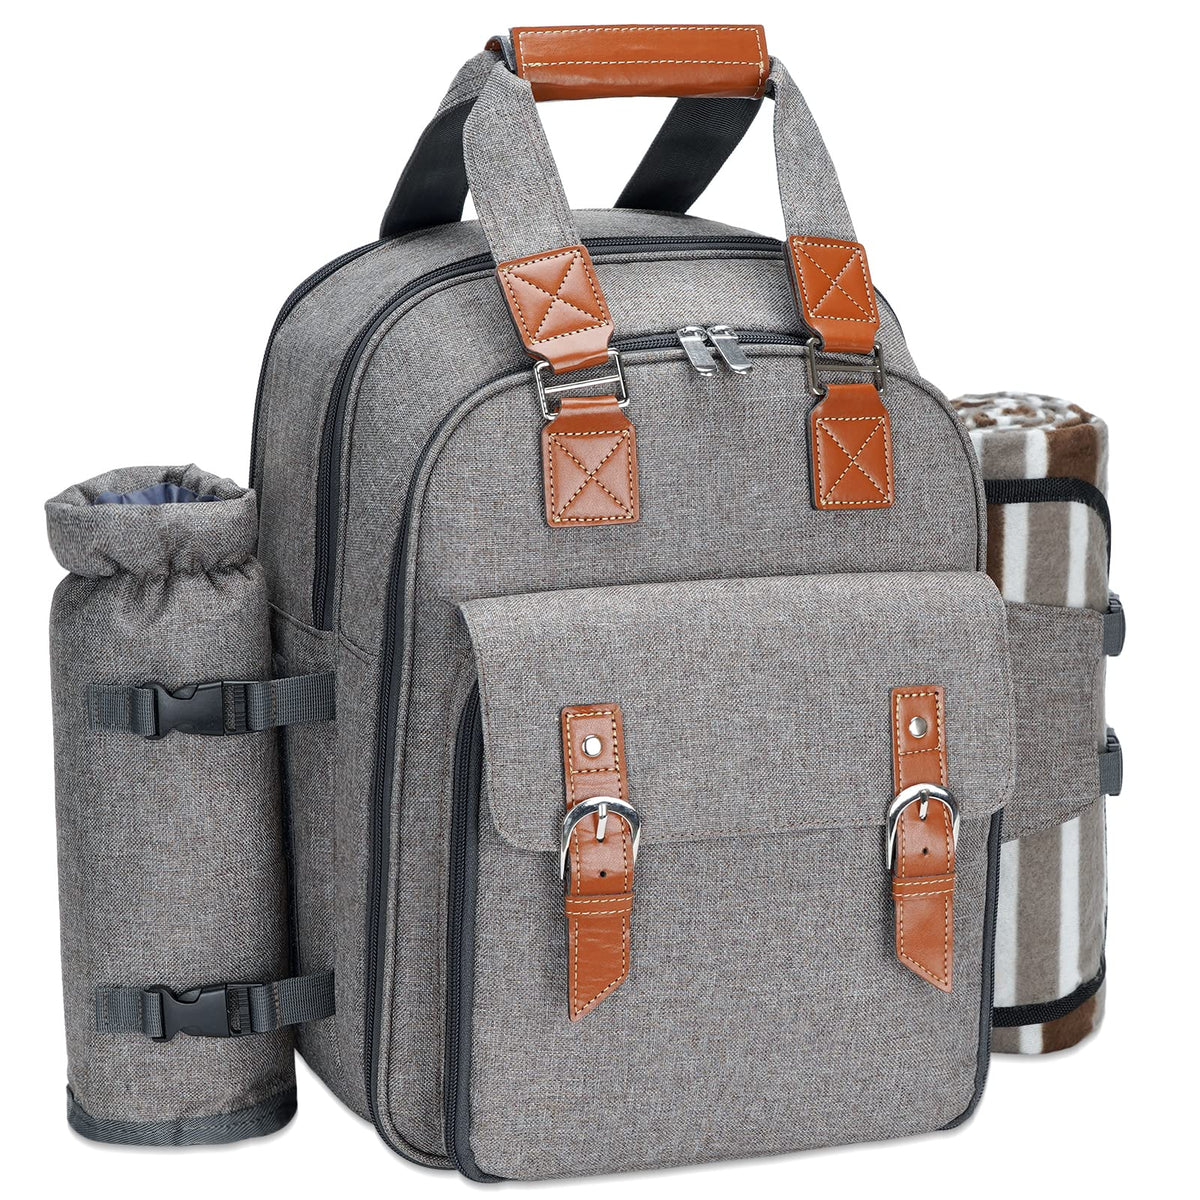 Picnic Backpack for 4 Person with Blanket